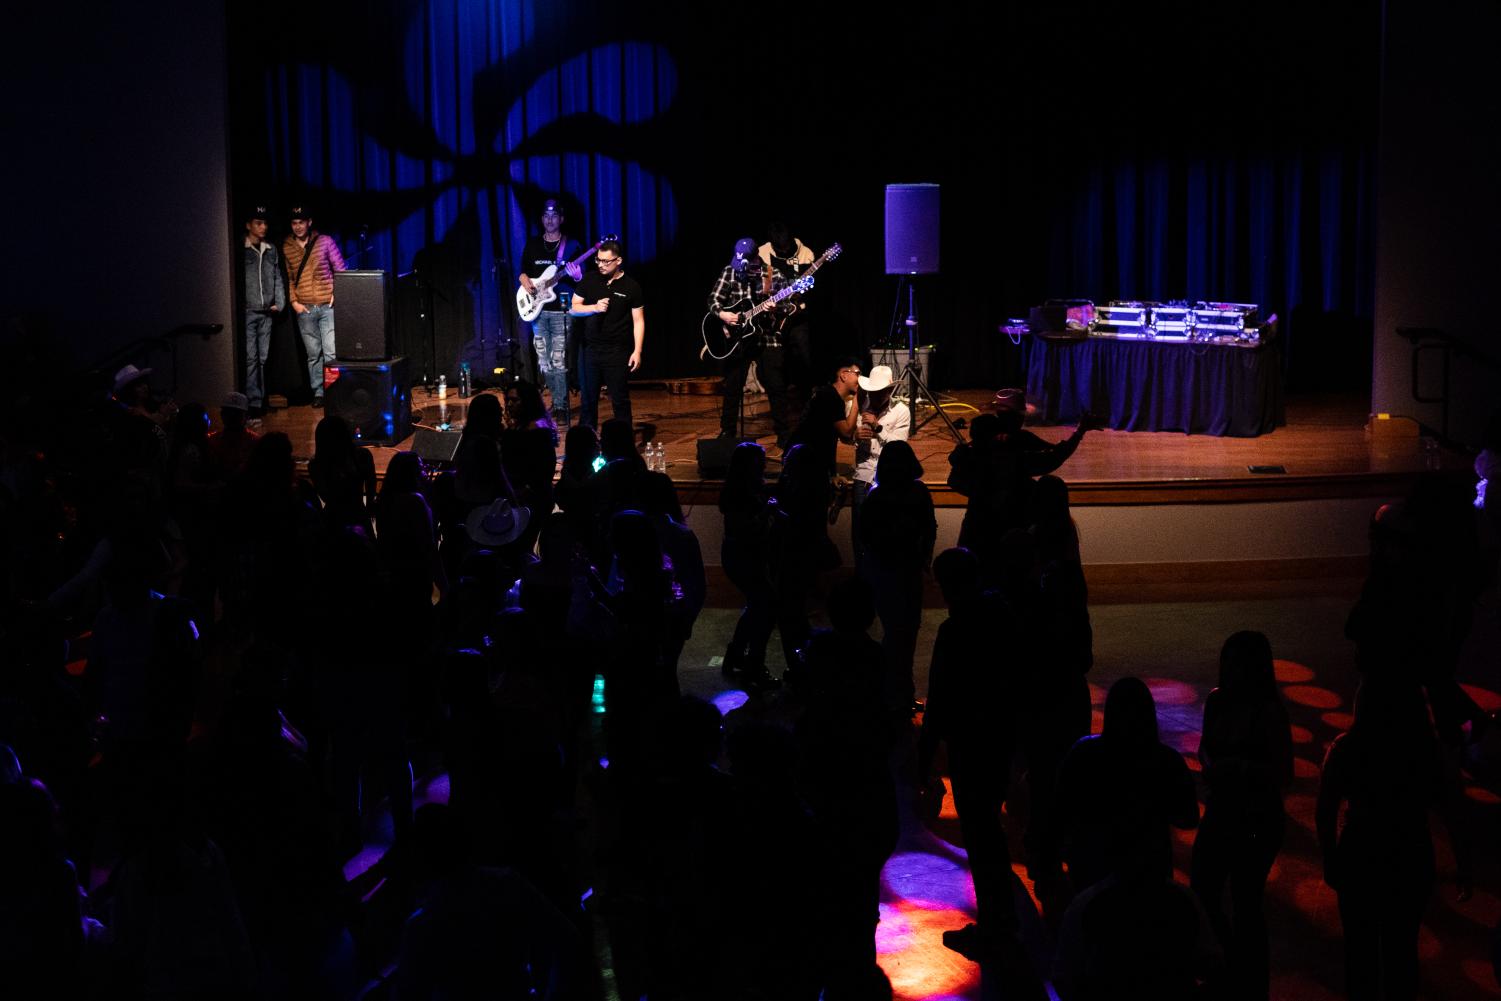 Band Nuevo Armamento plays a mixture of their own music and famous covers, such as Los Tucanes de Tijuana’s La Chona, on the stage of Jack Adams Hall within SF State’s Cesar Chavez Student Center for Banda Nite on Dec. 2, 2022. (Daniel Hernandez / Xpress Magazine)